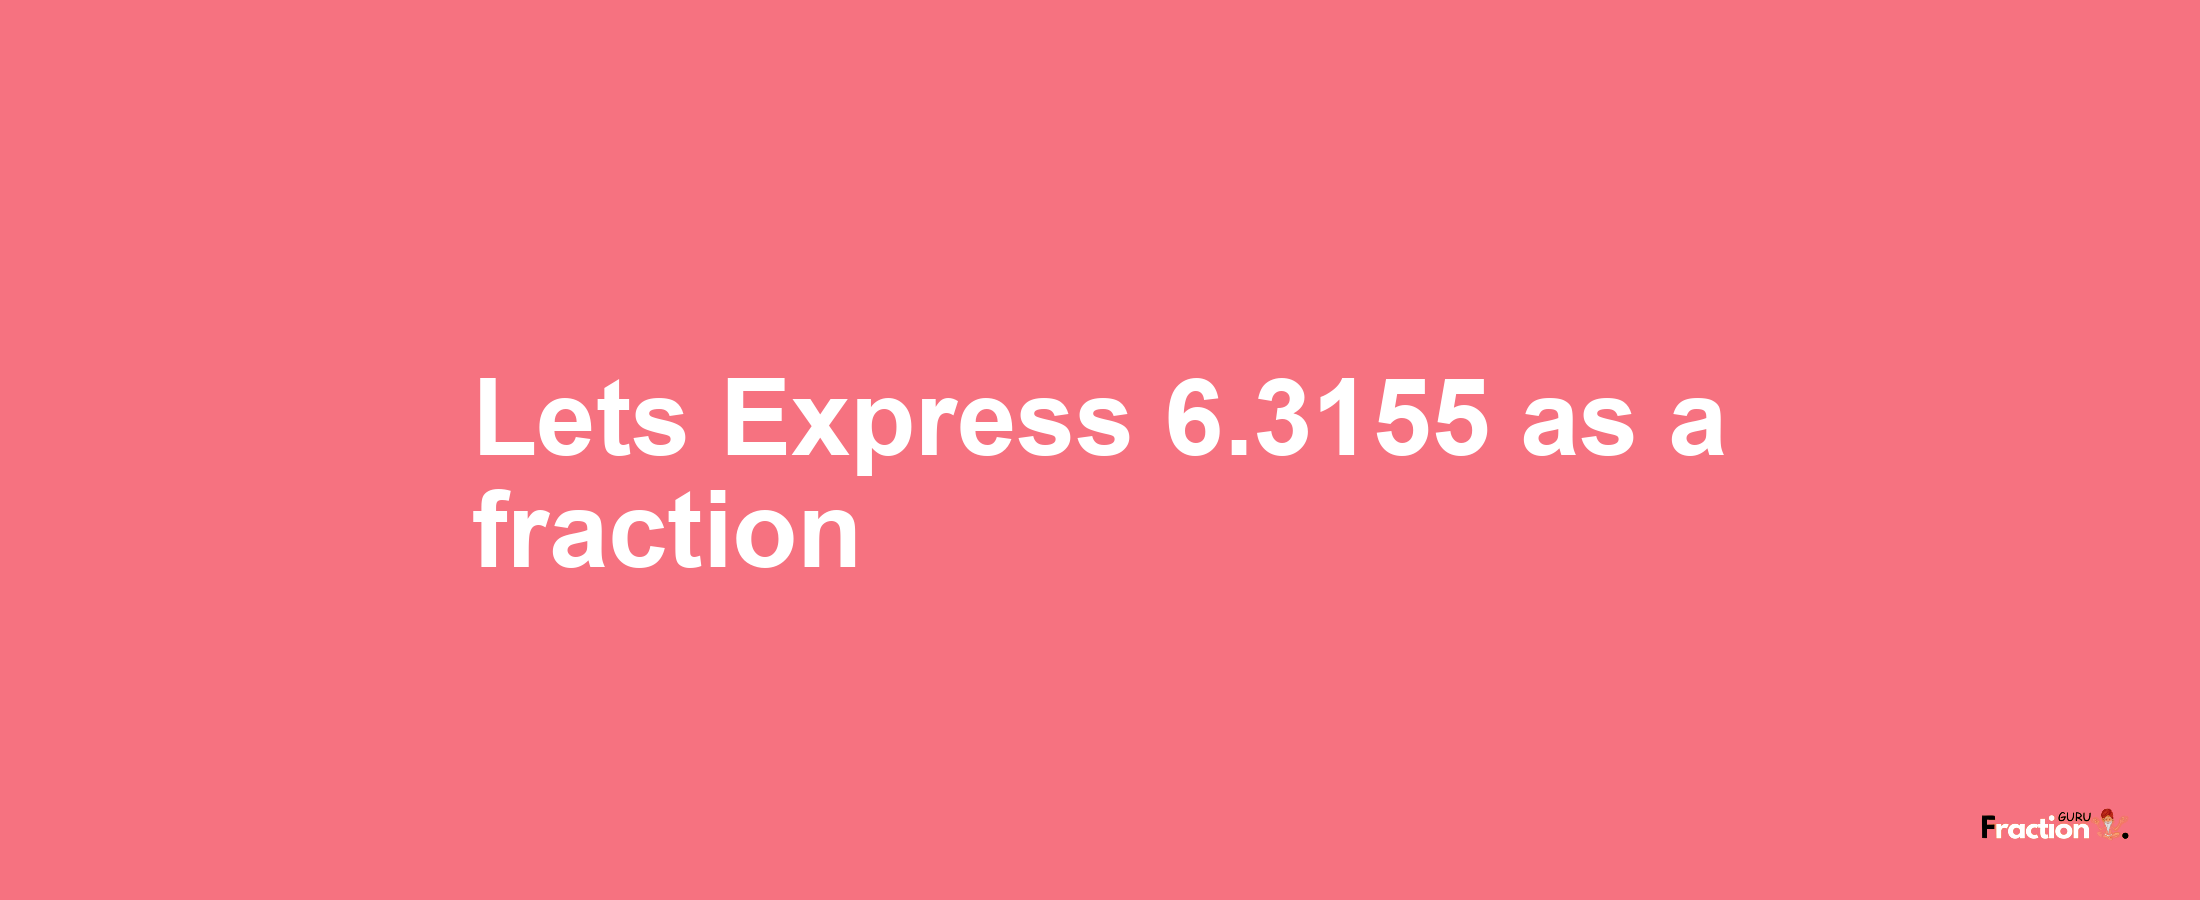 Lets Express 6.3155 as afraction